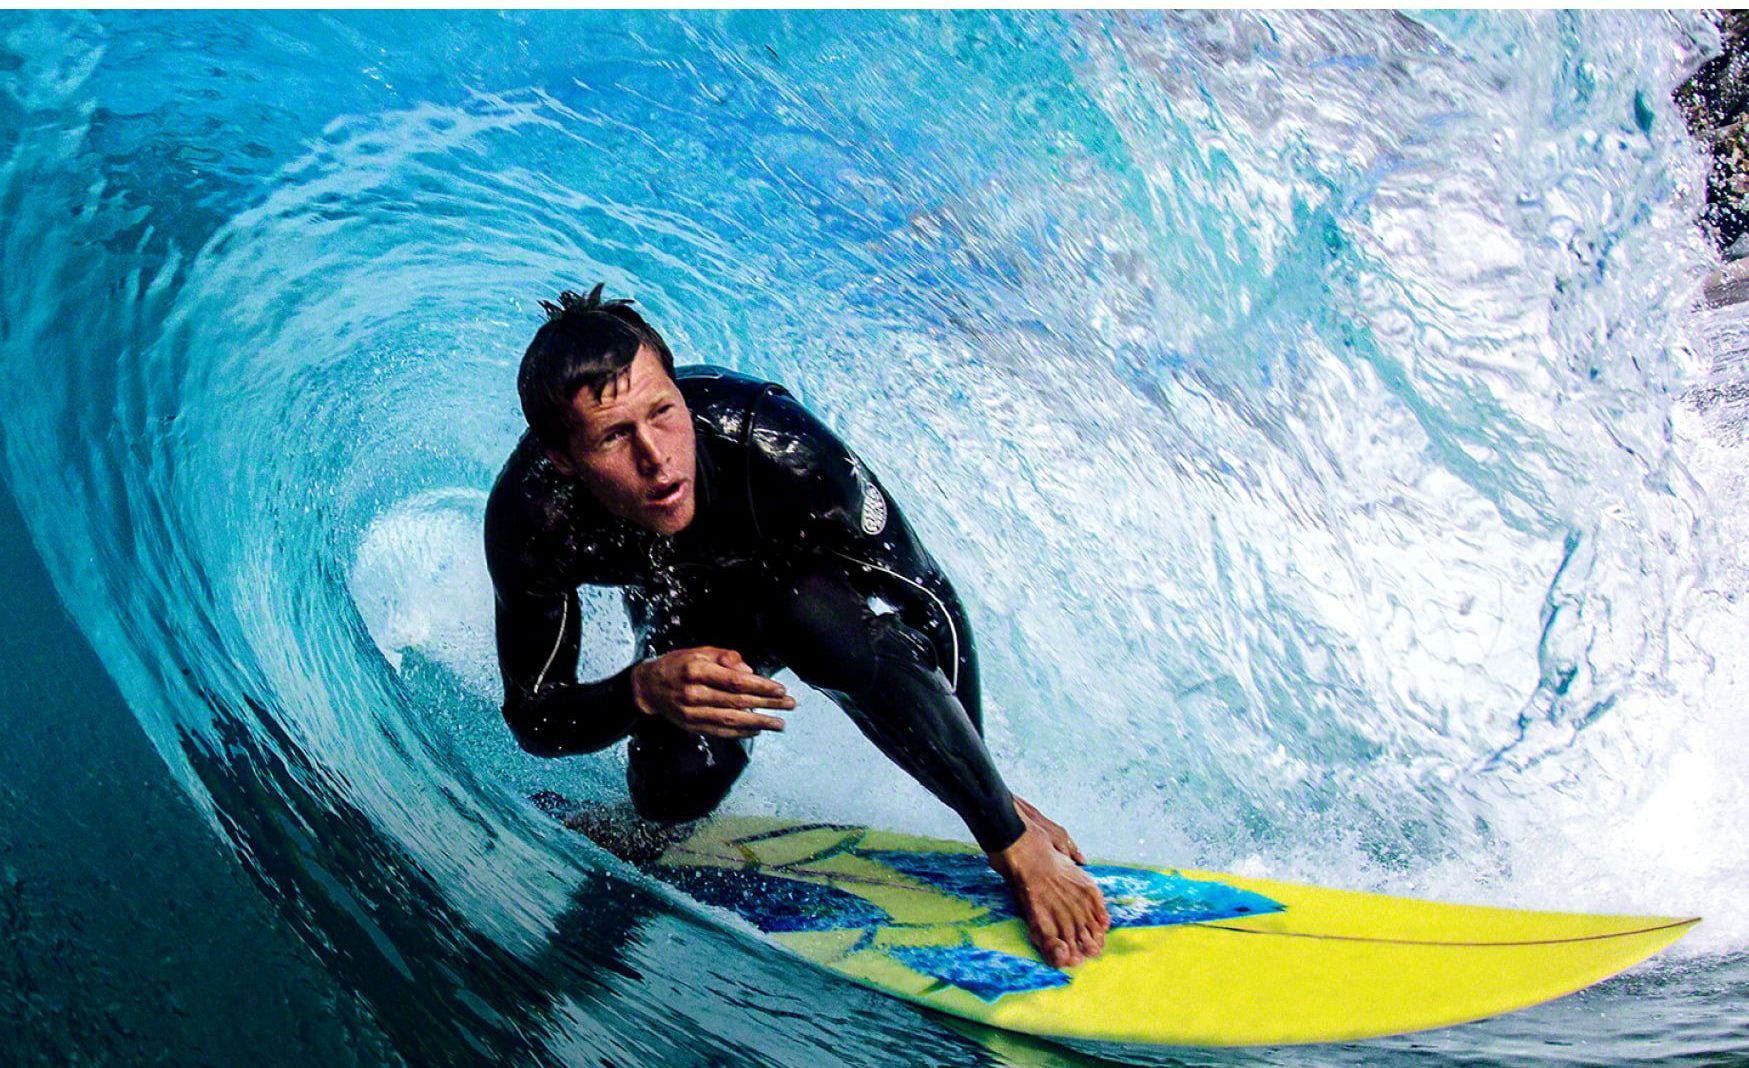 a man in a wetsuit is riding a wave on a surfboard showing blur-free picture quality on a sony mini led tv